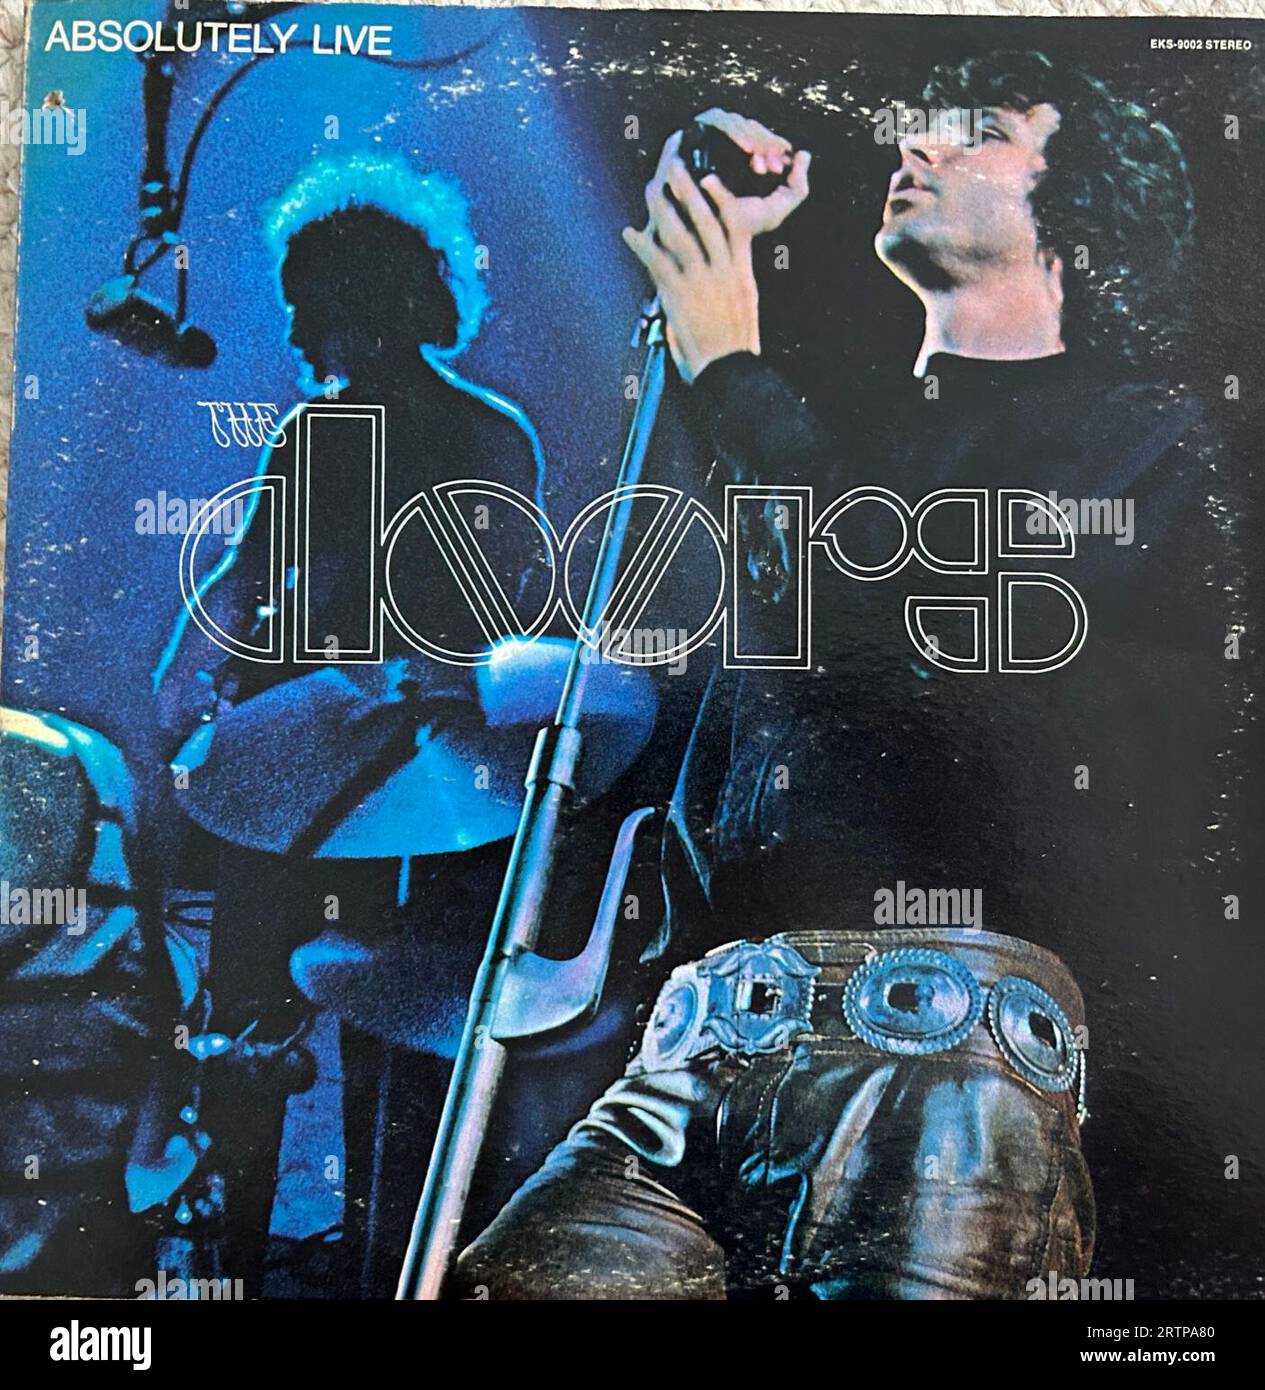 Cover LP VInyl Records Album, The Doors, 'Absolutely Live' 1970s Rock Music (Credit Photography: Frank Lisciandro, Elektra Records) Jim Morrison (Lead Vocals) Classic rock, vintage covers Stock Photo